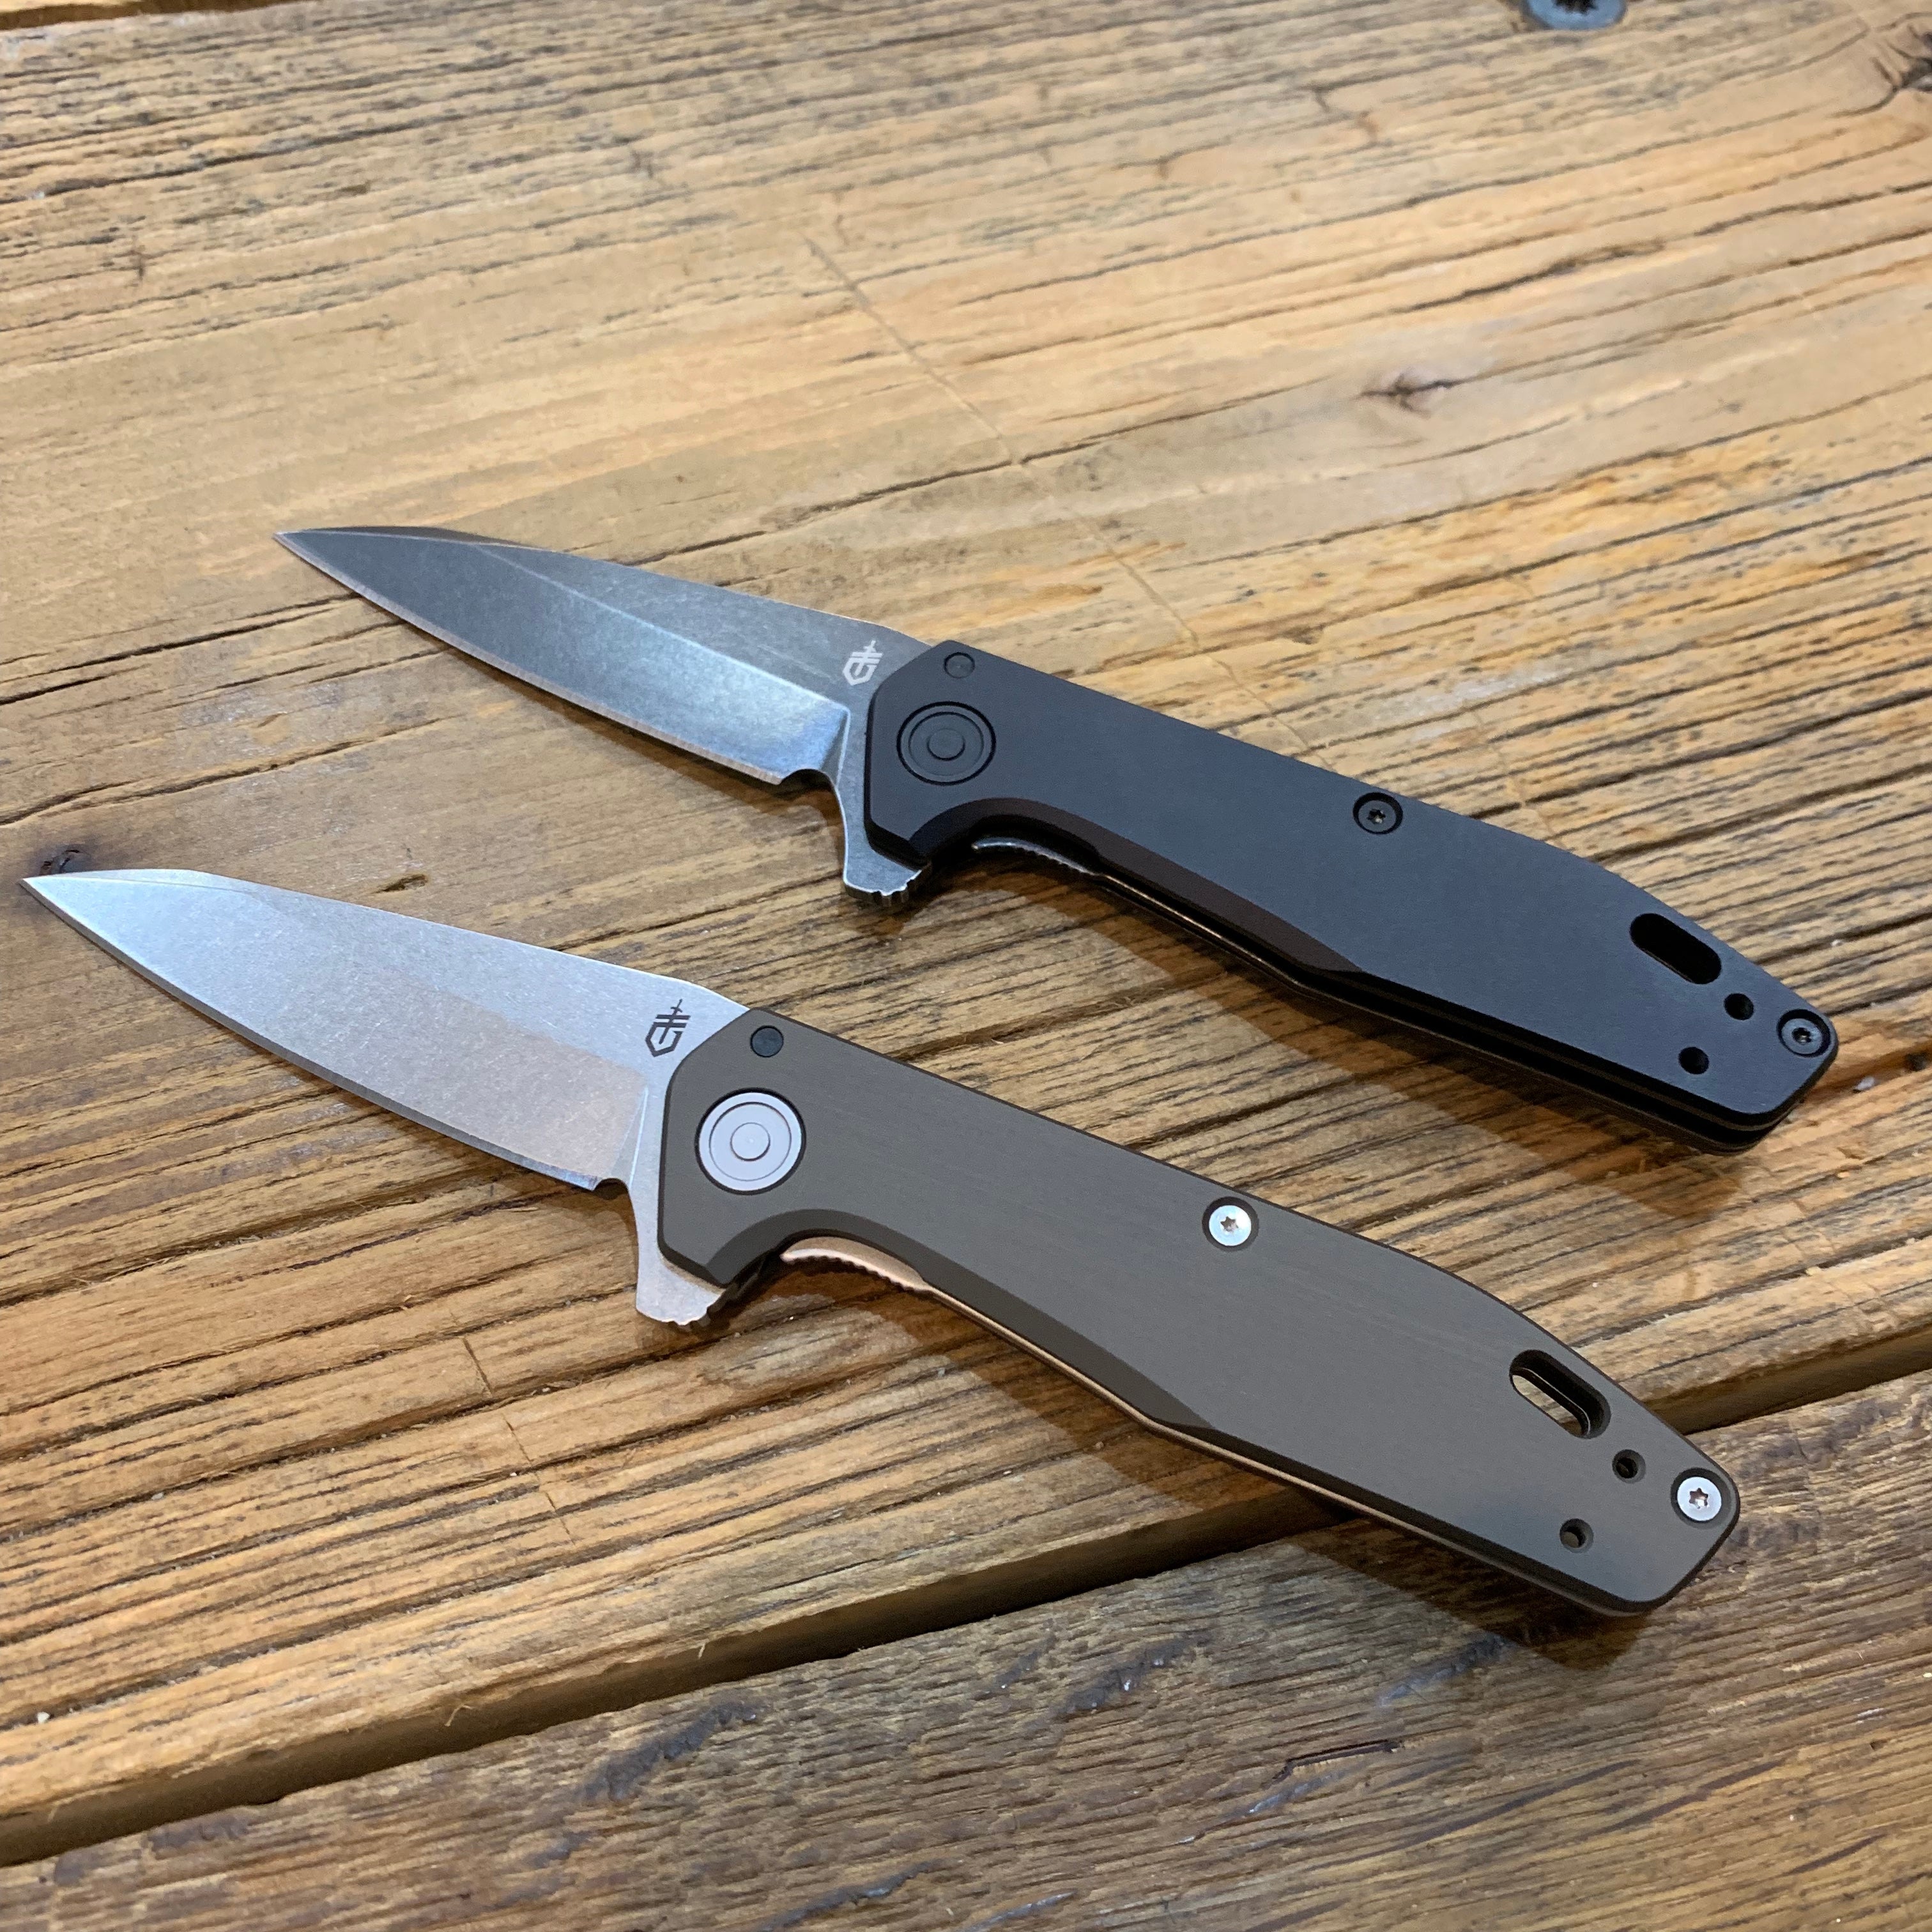 Why the Gerber Fastball Will Forever Change Gerber and the Way the Knife Industry Looks at Them